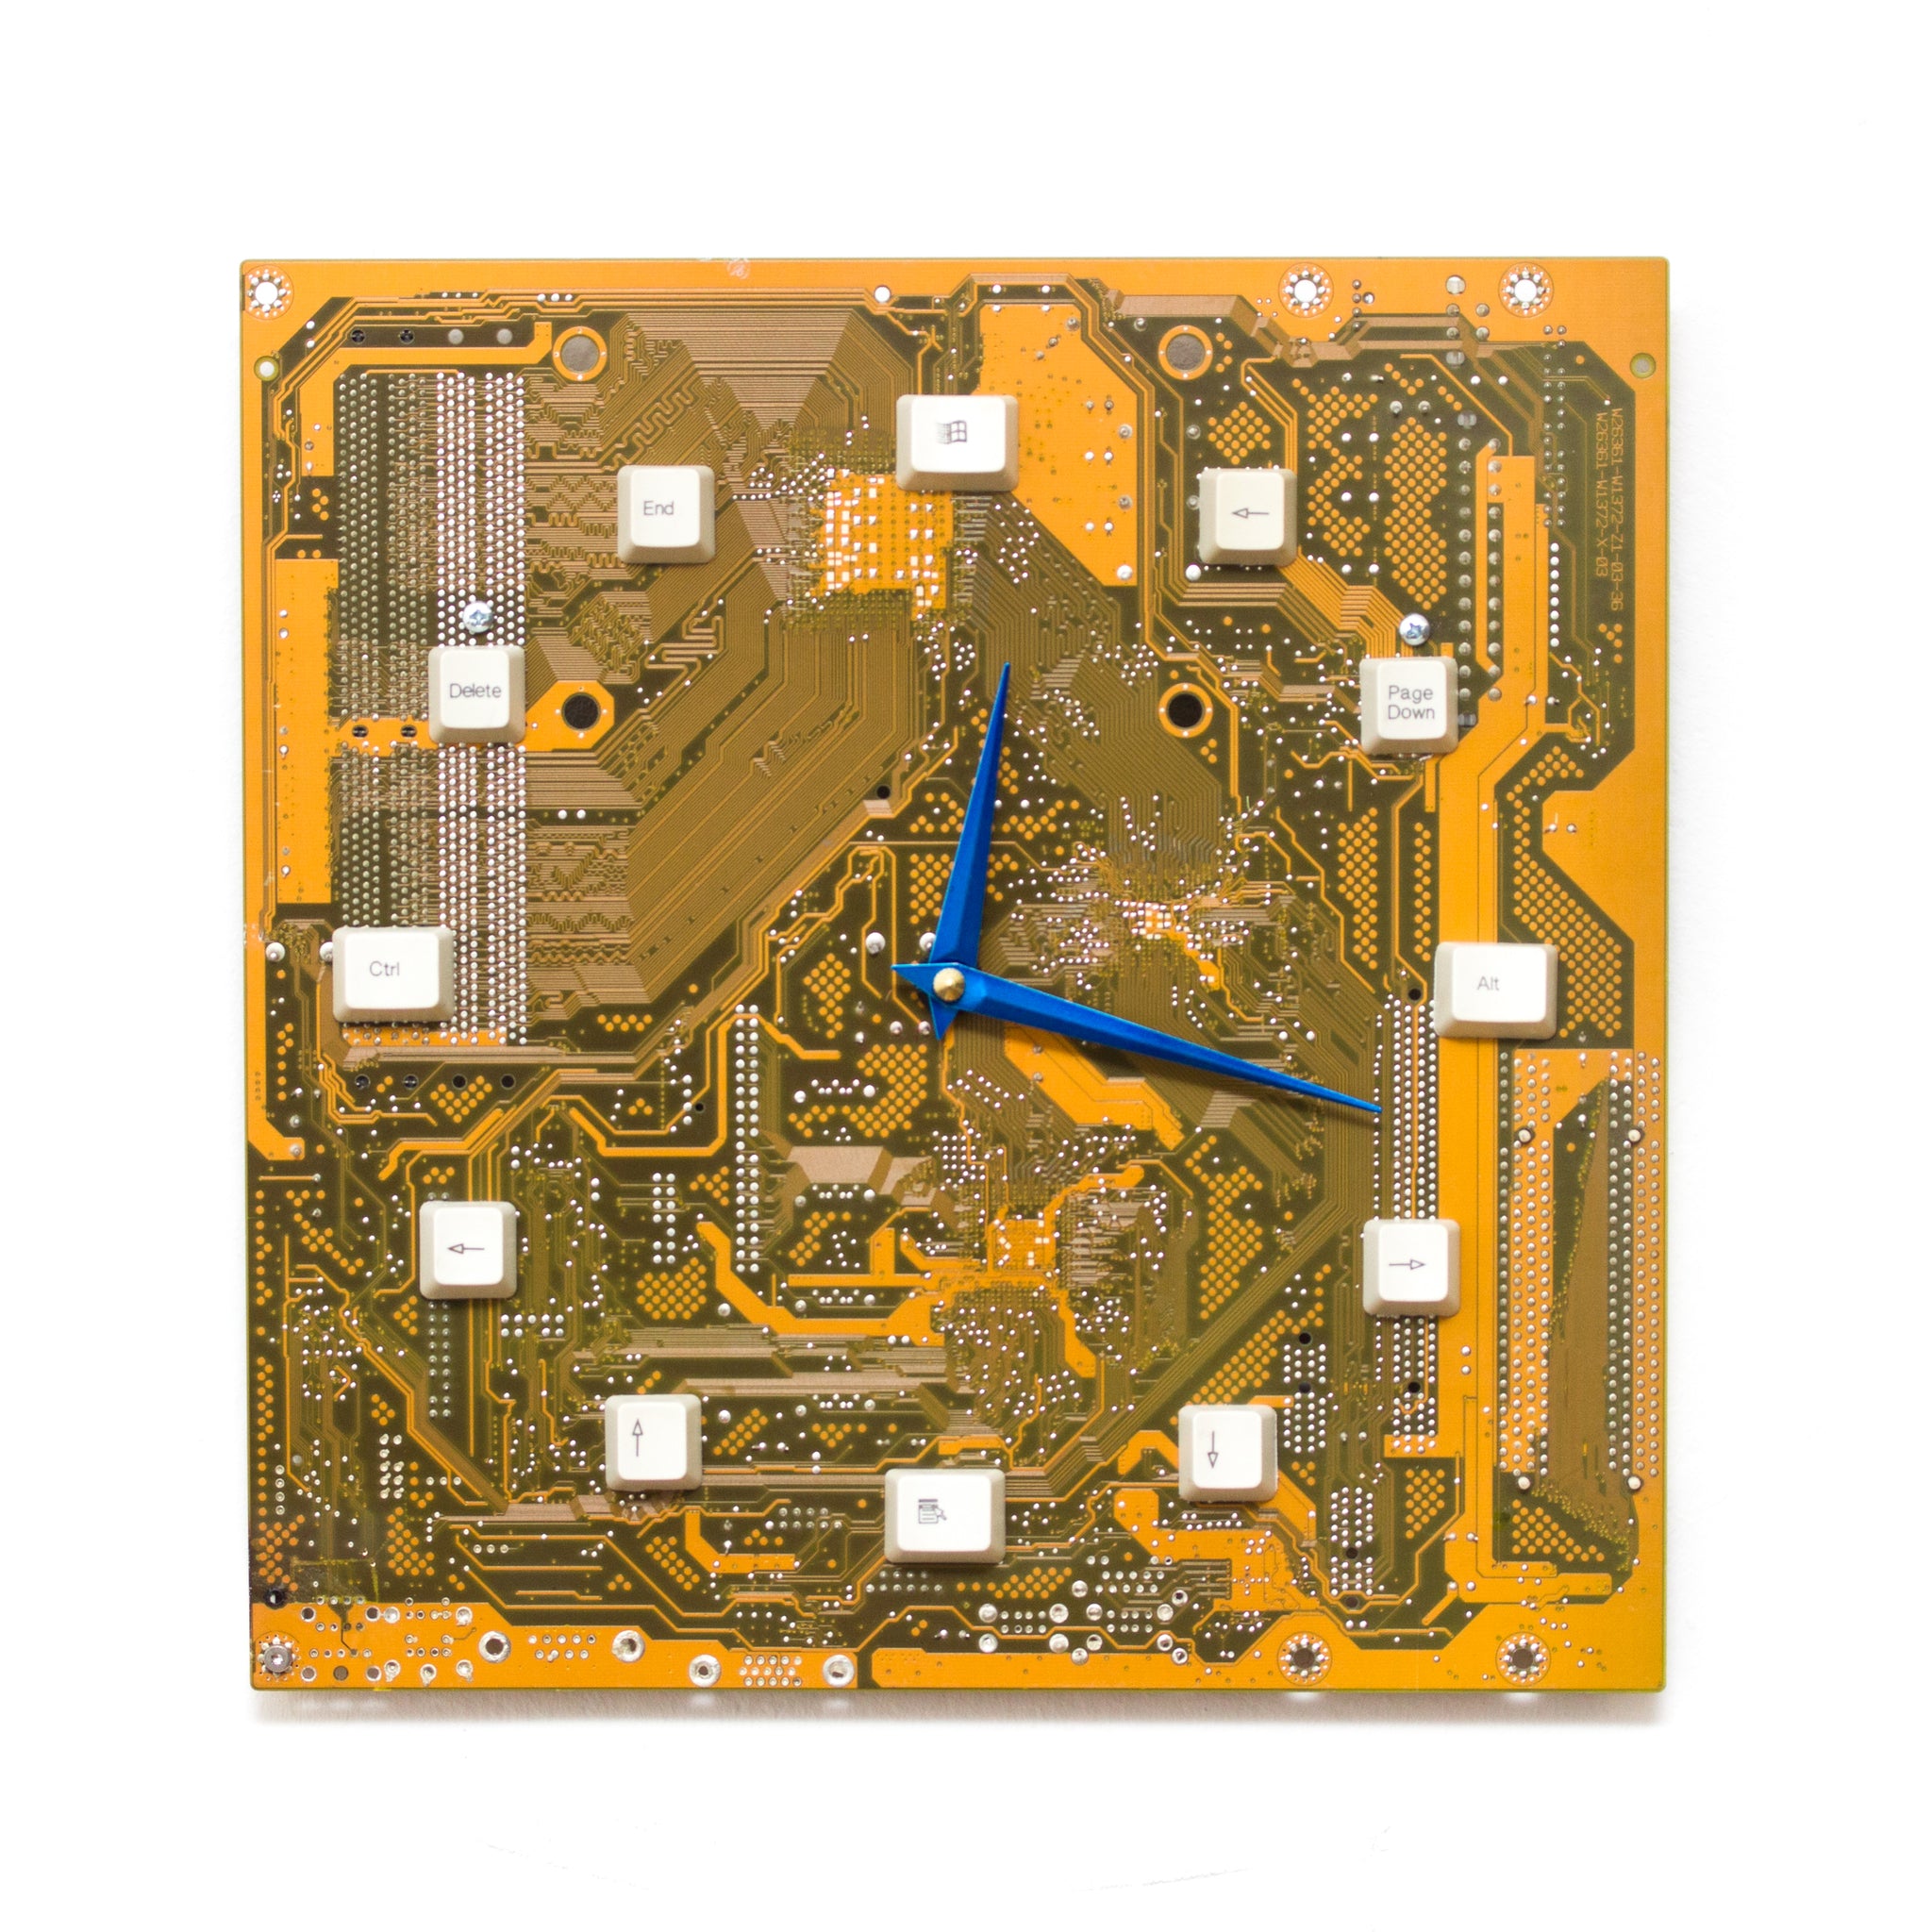 Unique Wall clock - yellow / olive green recycled motherboard - ready to ship